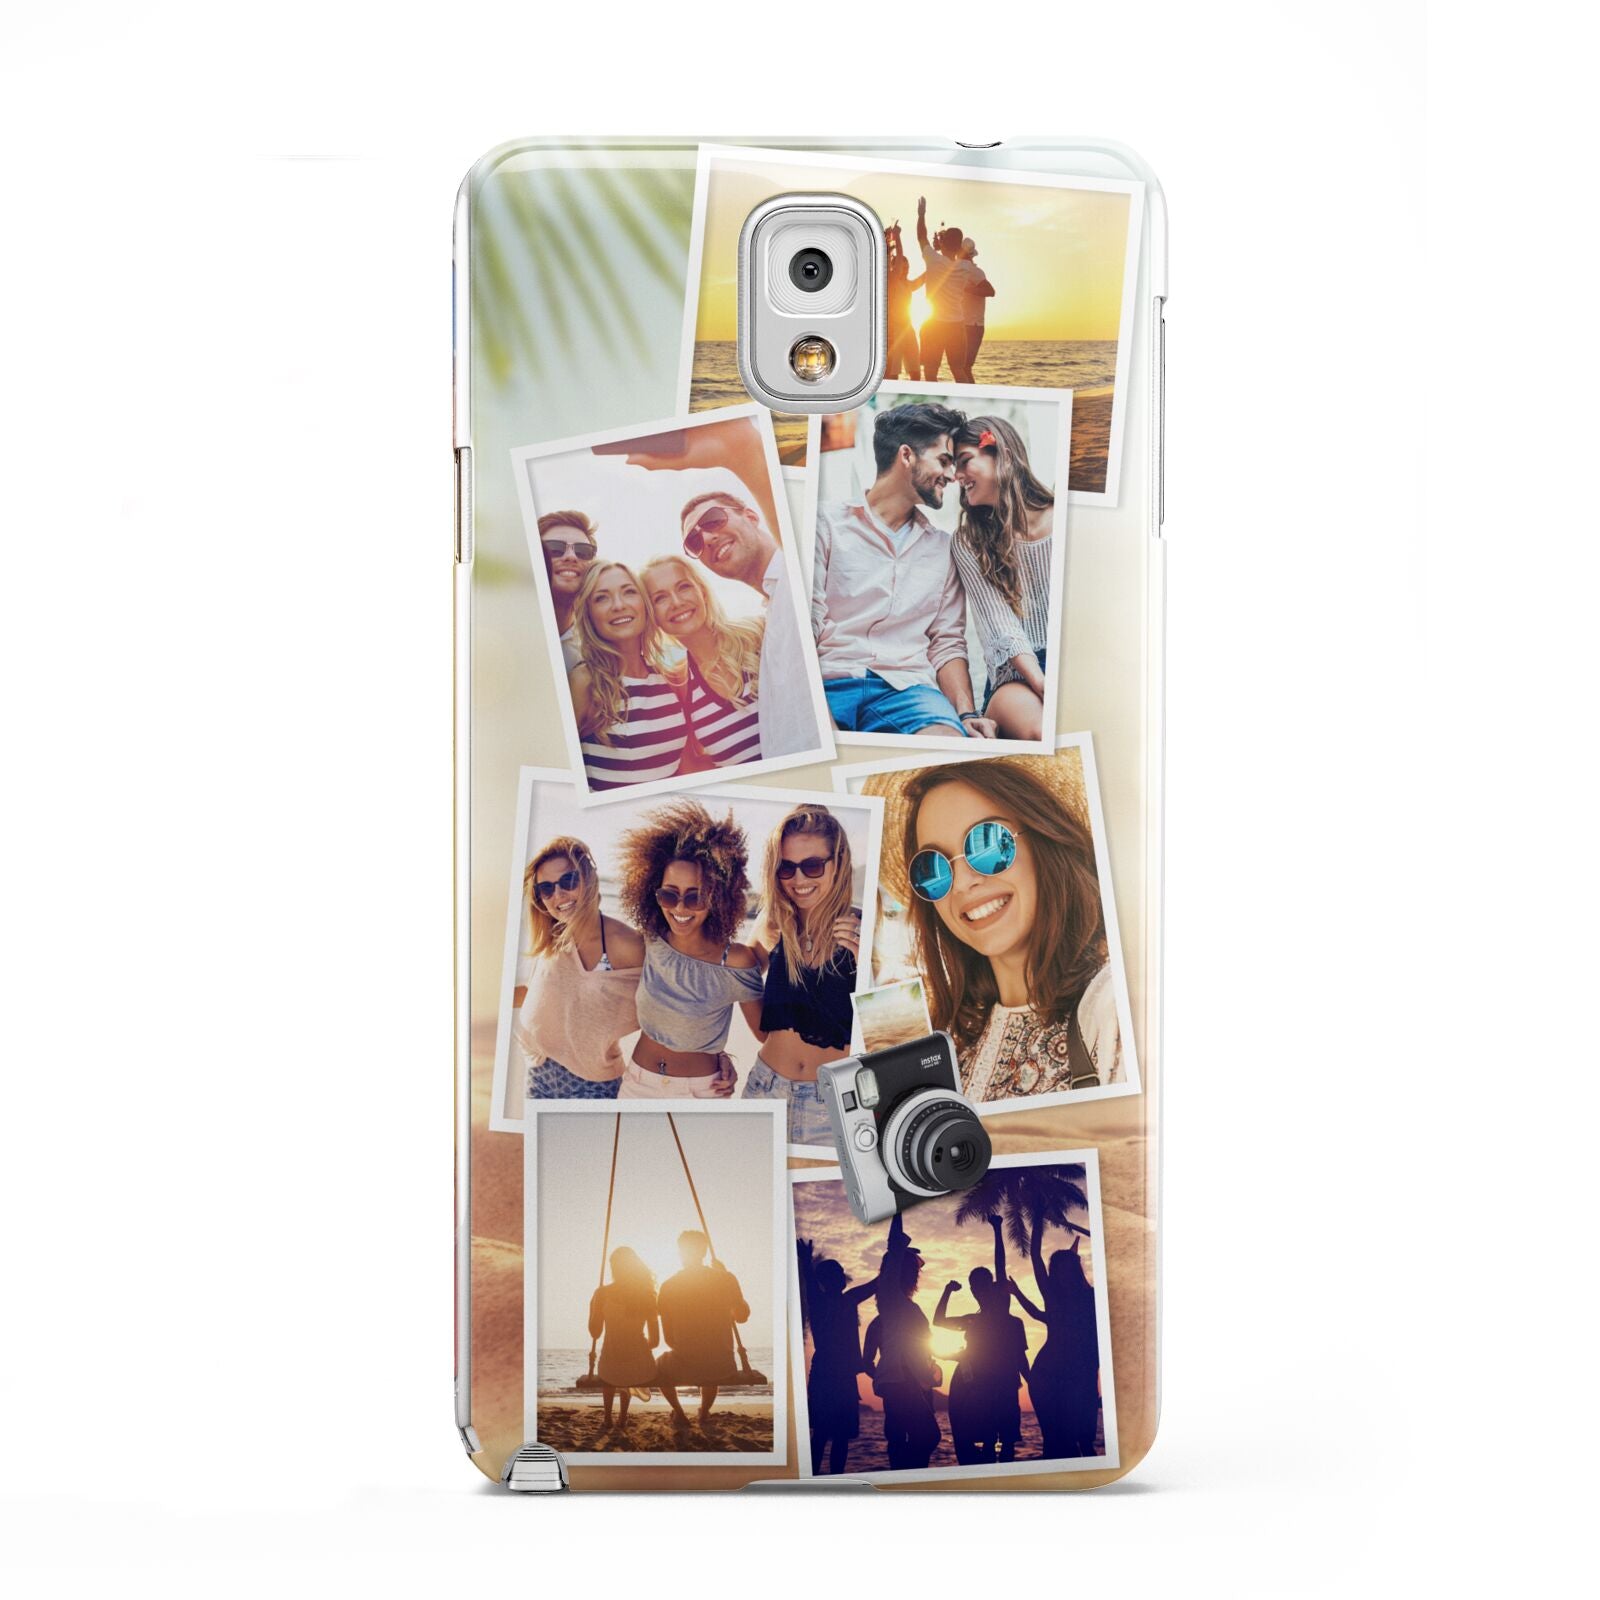 Personalised Summer Holiday Photos Samsung Galaxy Note 3 Case